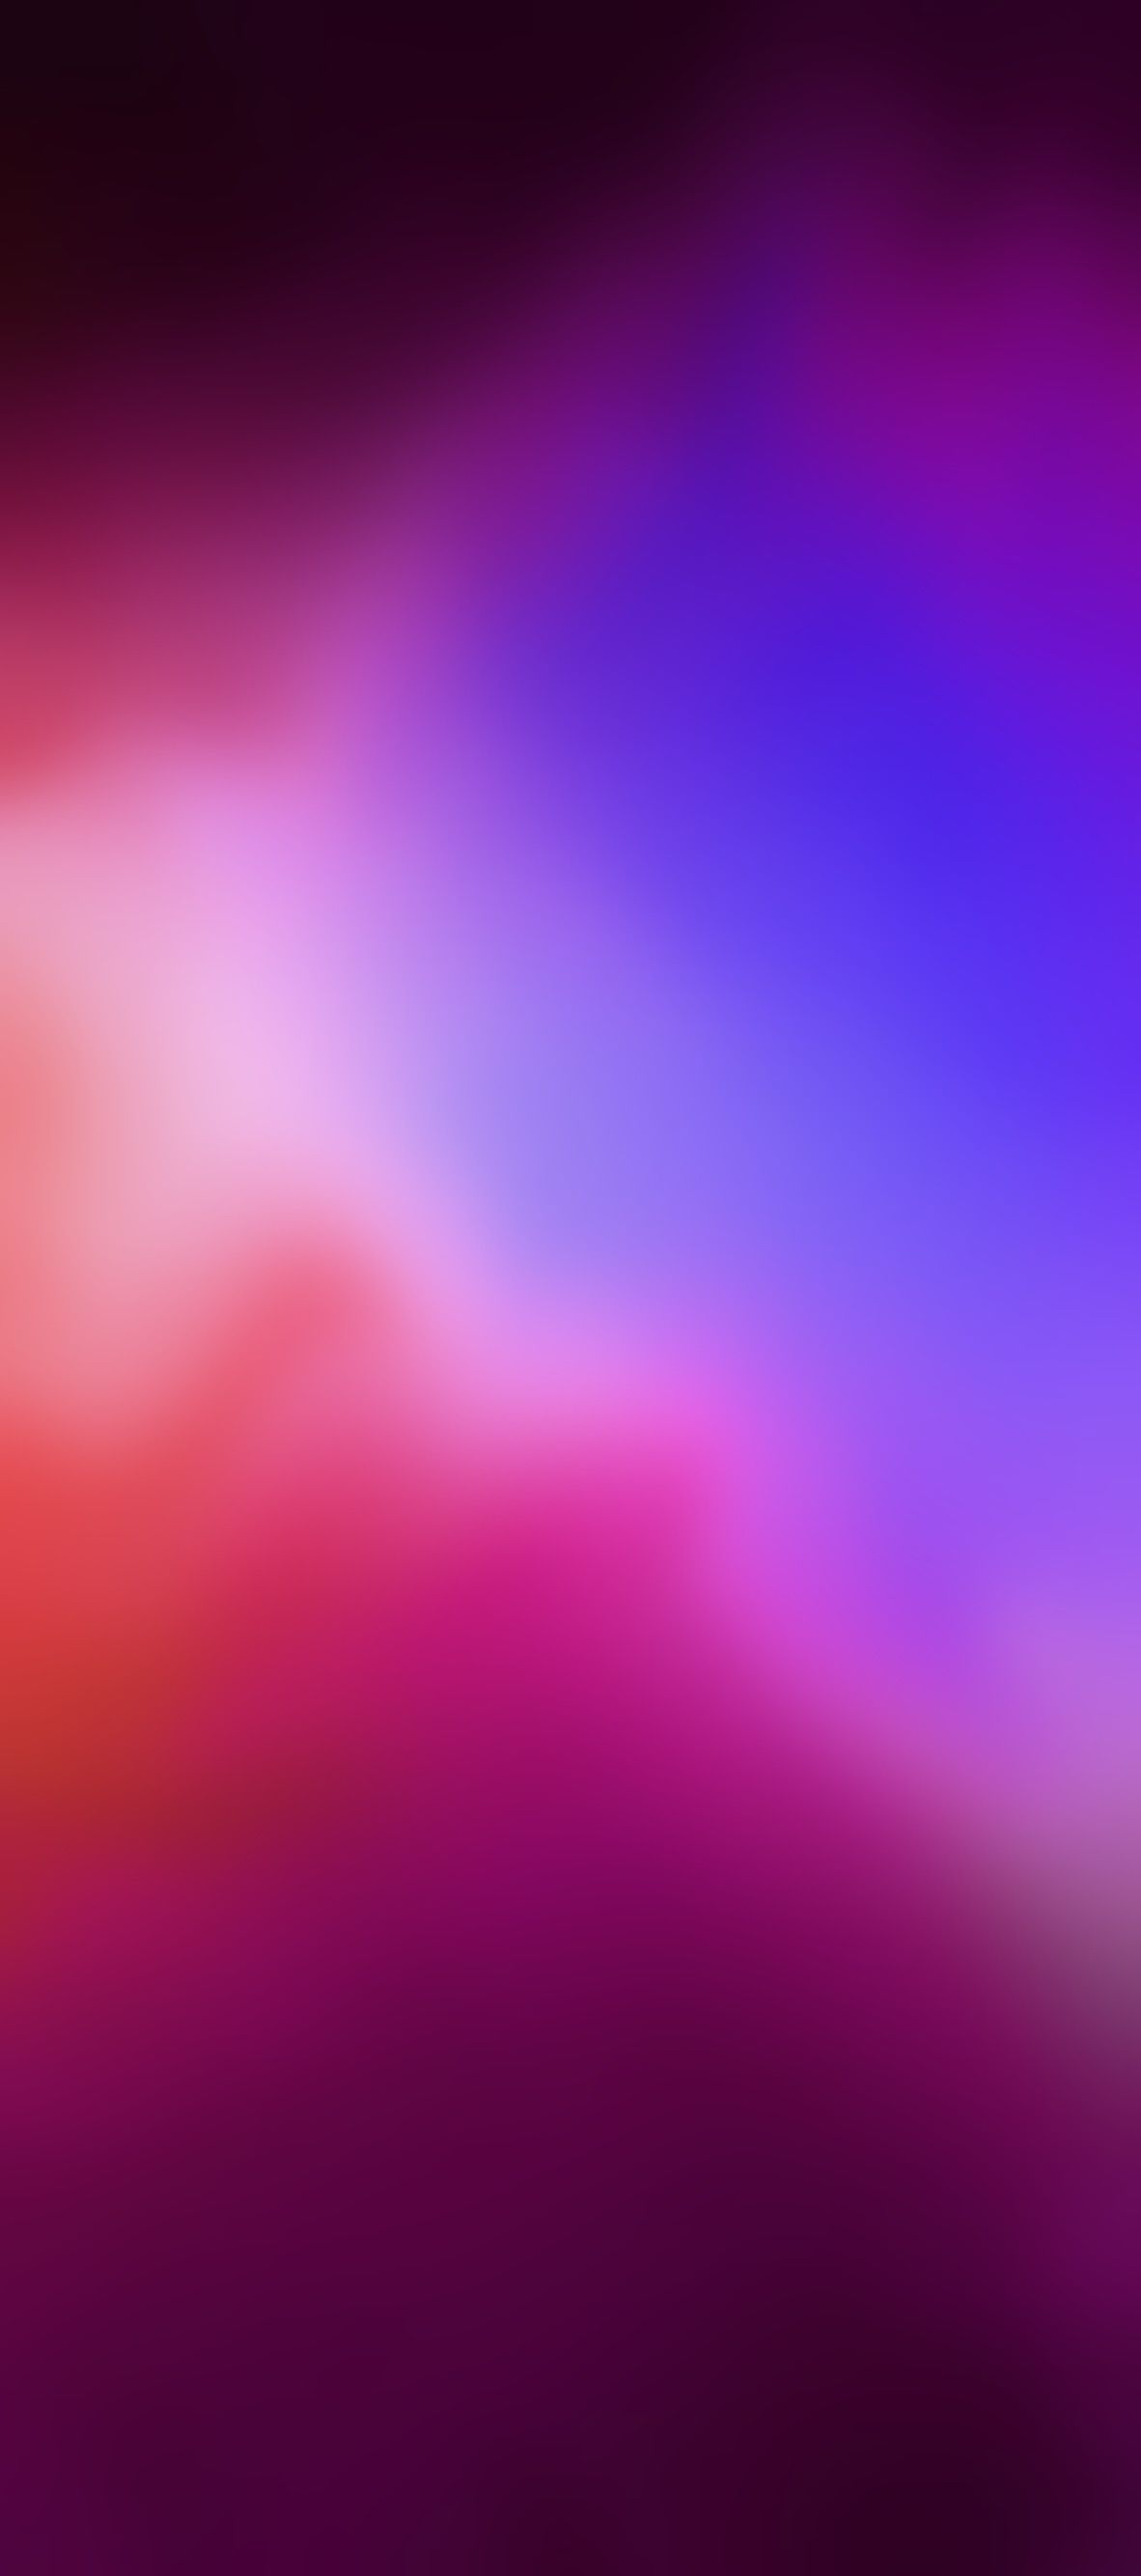 Ios 11, Iphone X, Purple, Blue, Clean, Simple, Abstract, - Purple And Blue Iphone , HD Wallpaper & Backgrounds